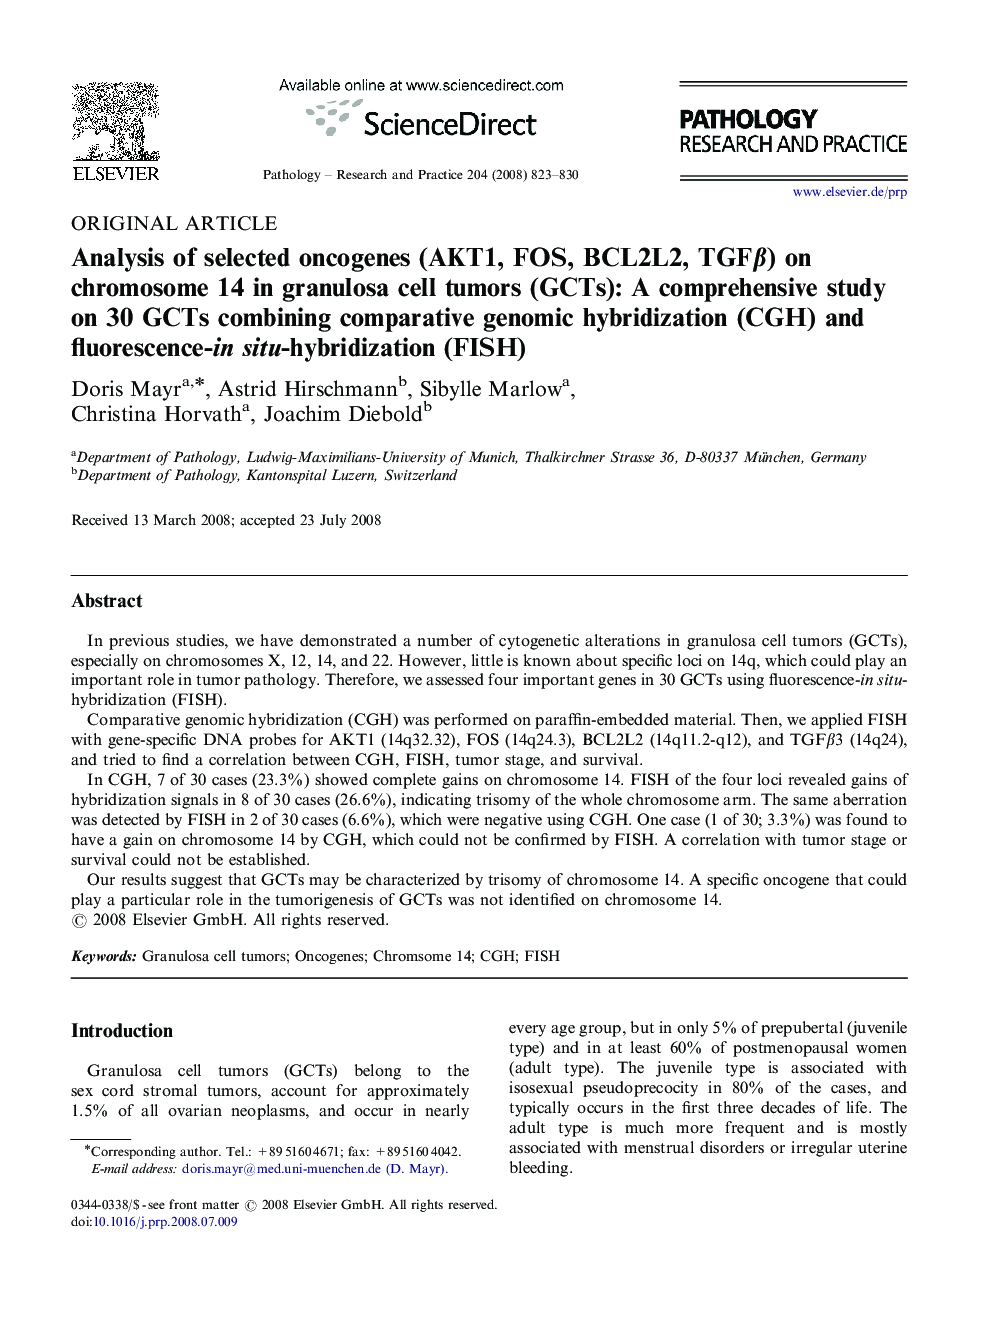 Analysis of selected oncogenes (AKT1, FOS, BCL2L2, TGFβ) on chromosome 14 in granulosa cell tumors (GCTs): A comprehensive study on 30 GCTs combining comparative genomic hybridization (CGH) and fluorescence-in situ-hybridization (FISH)